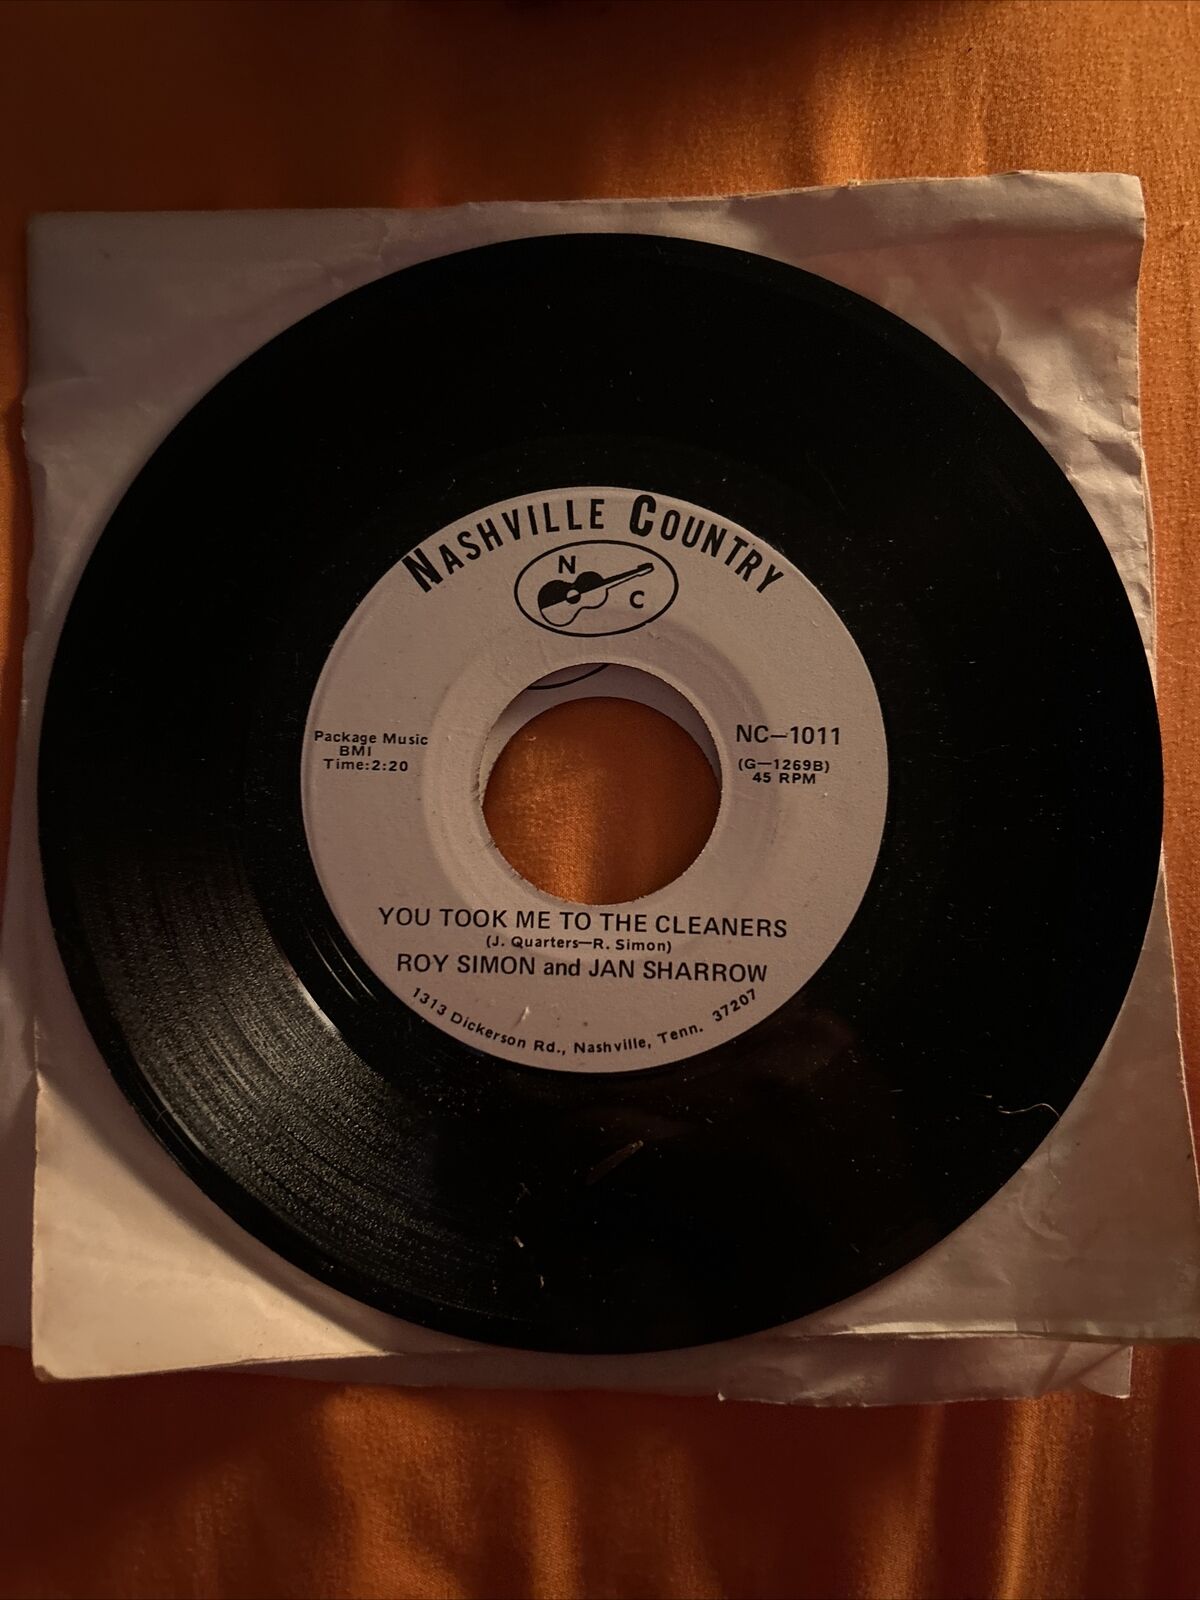 Vintage Nashville 45 rpm “You Took Me To The Cleaners “ Roy Summon & Jan Sparrow